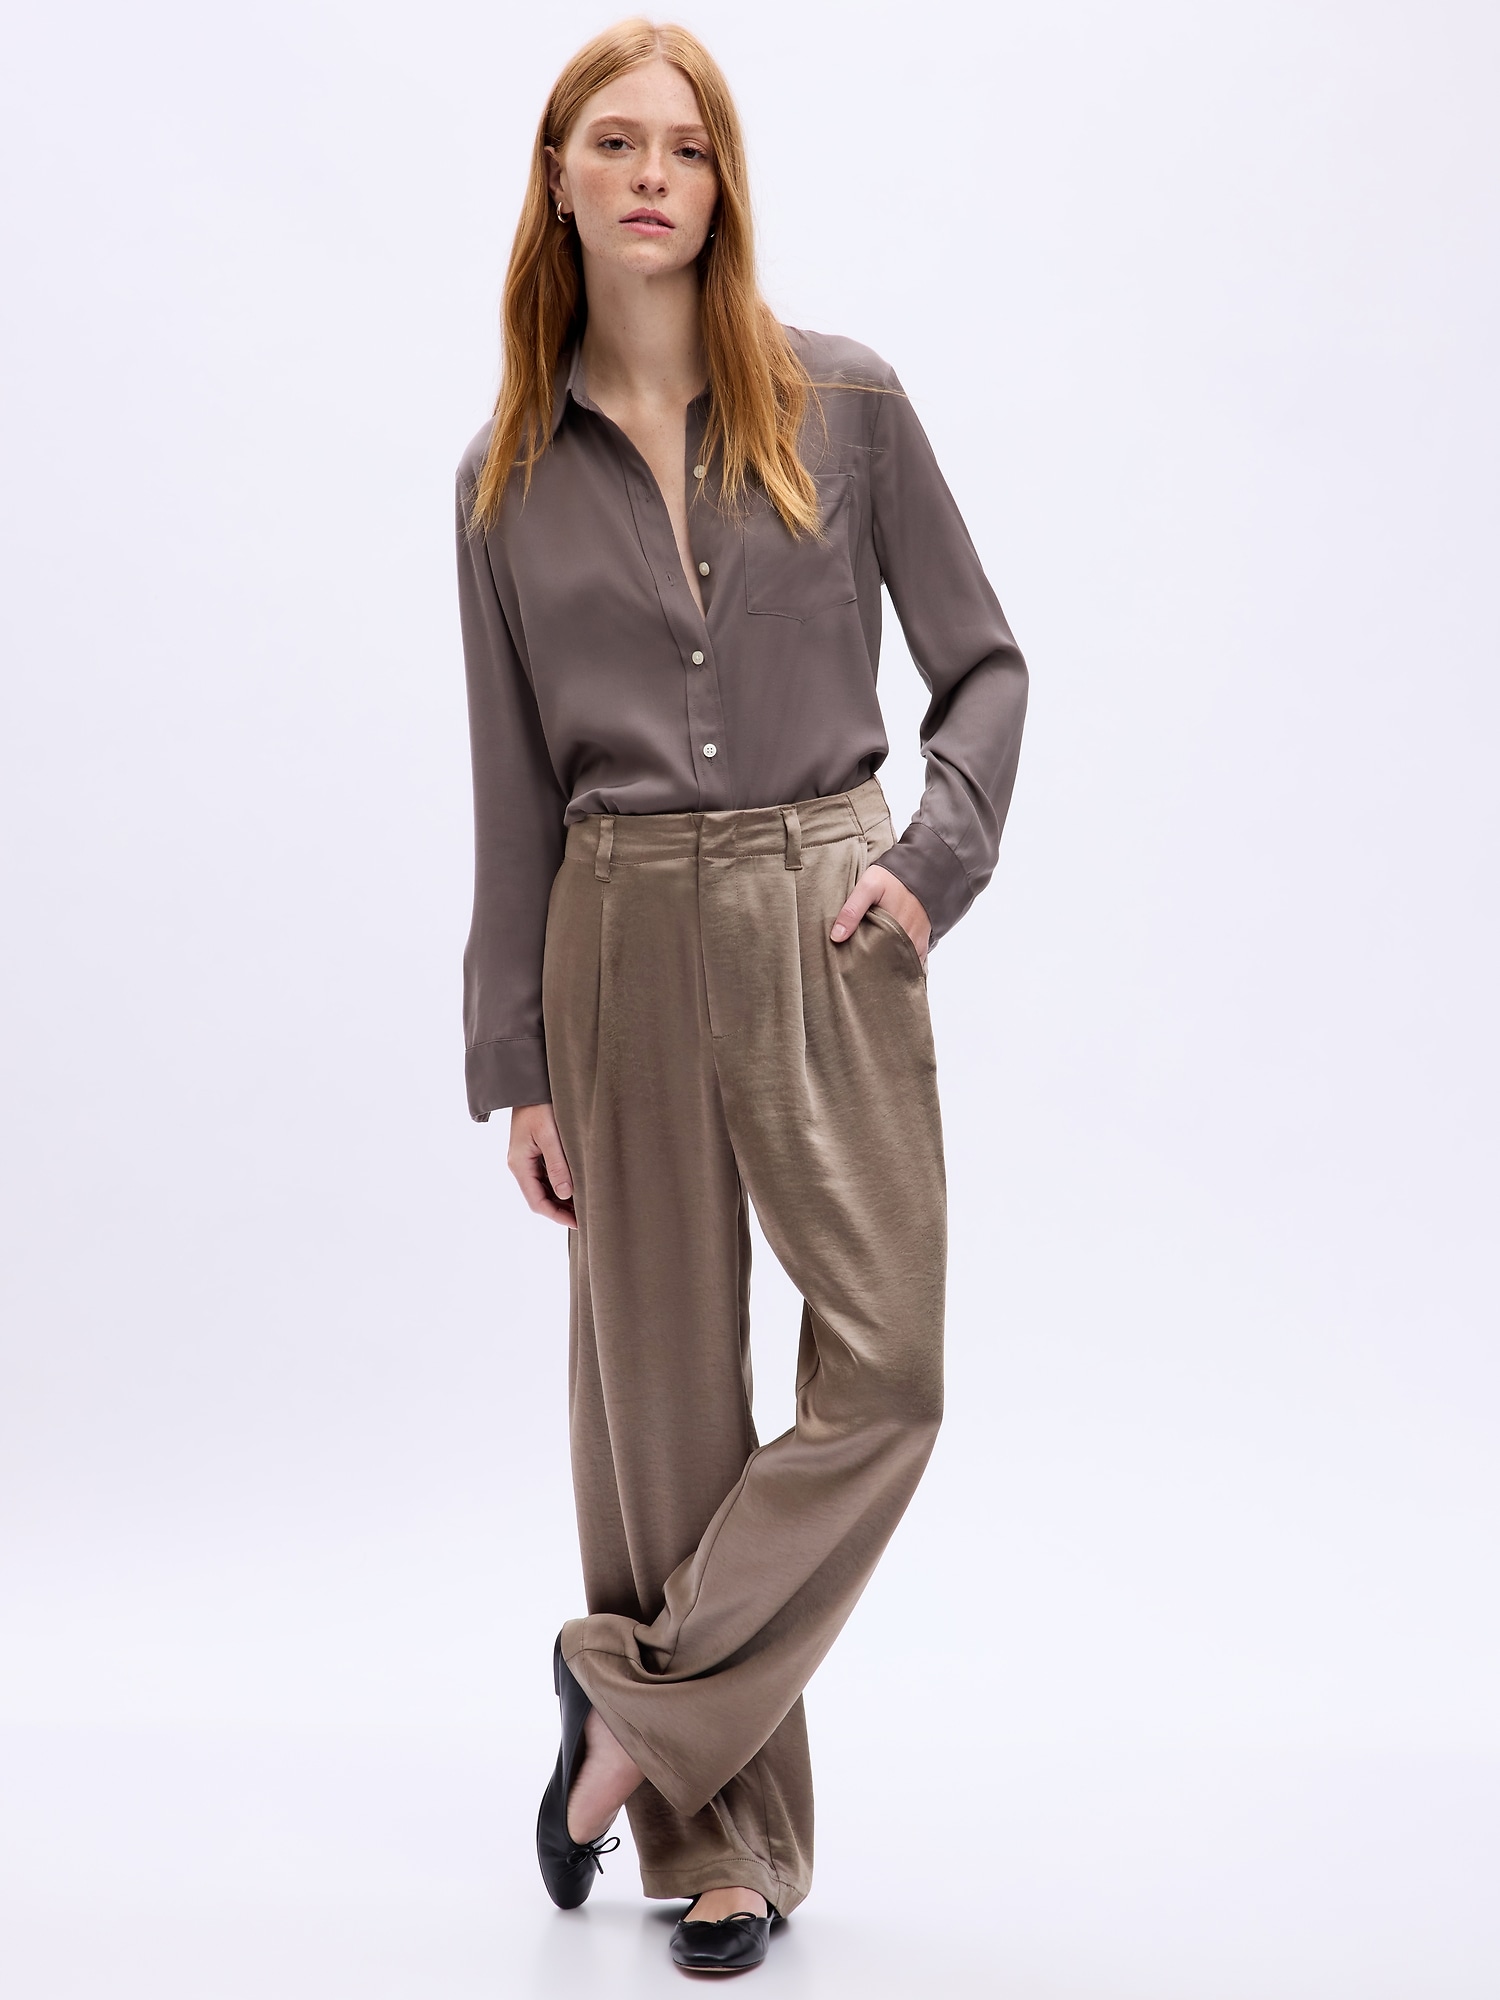 Taupe Gabardine Twill Top Pocket Flat Front with Keystone Belt Loops - 35R